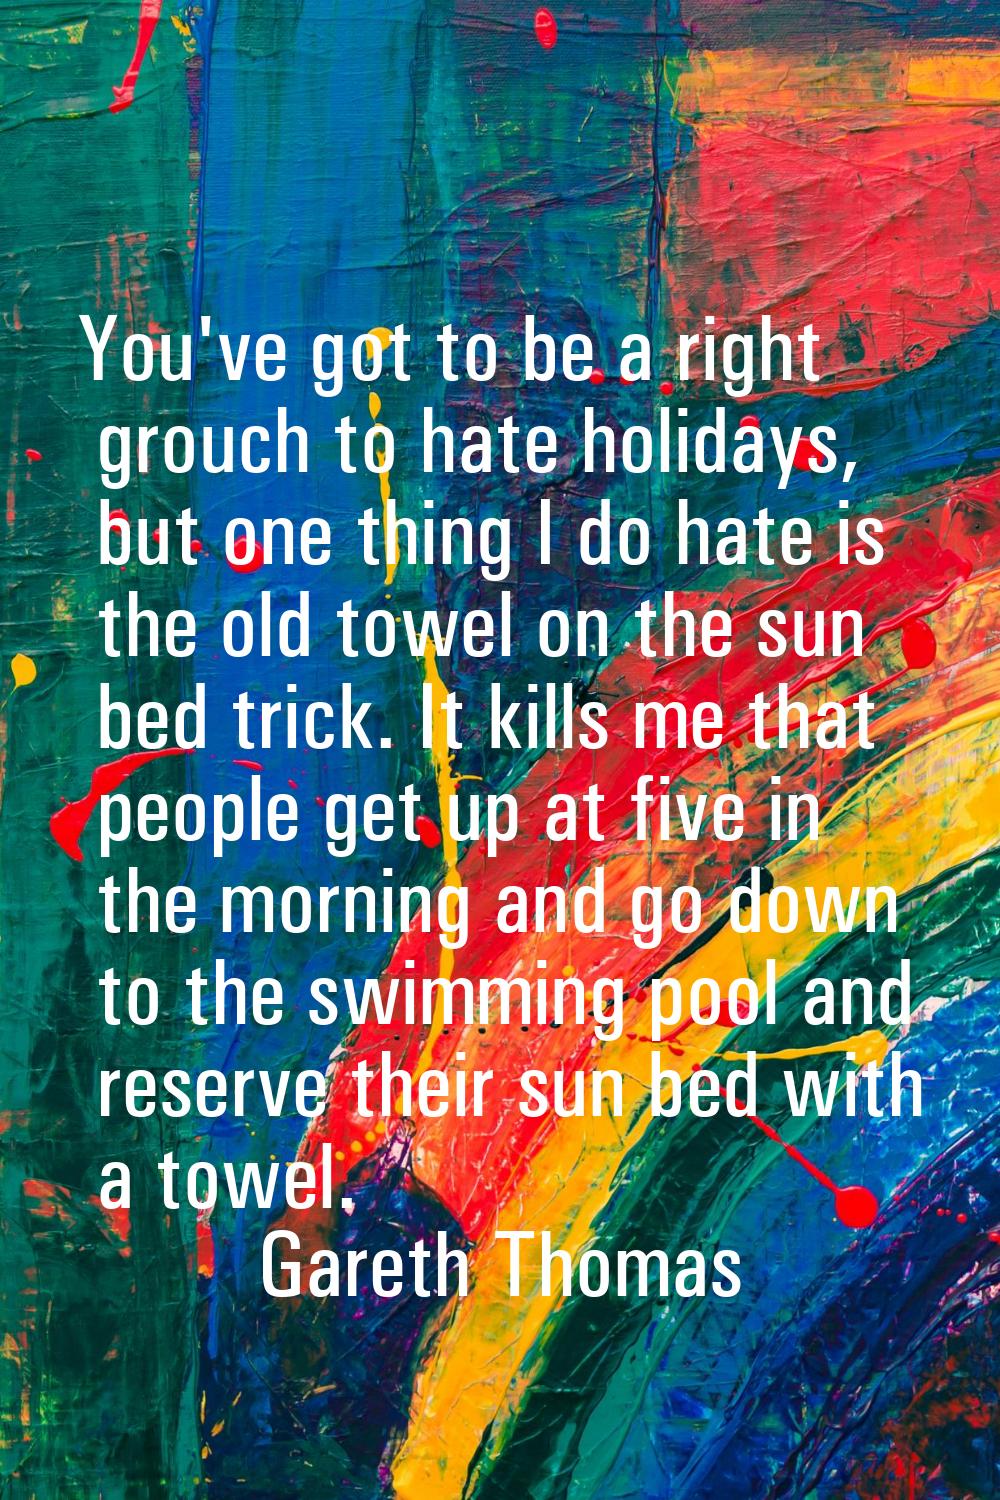 You've got to be a right grouch to hate holidays, but one thing I do hate is the old towel on the s